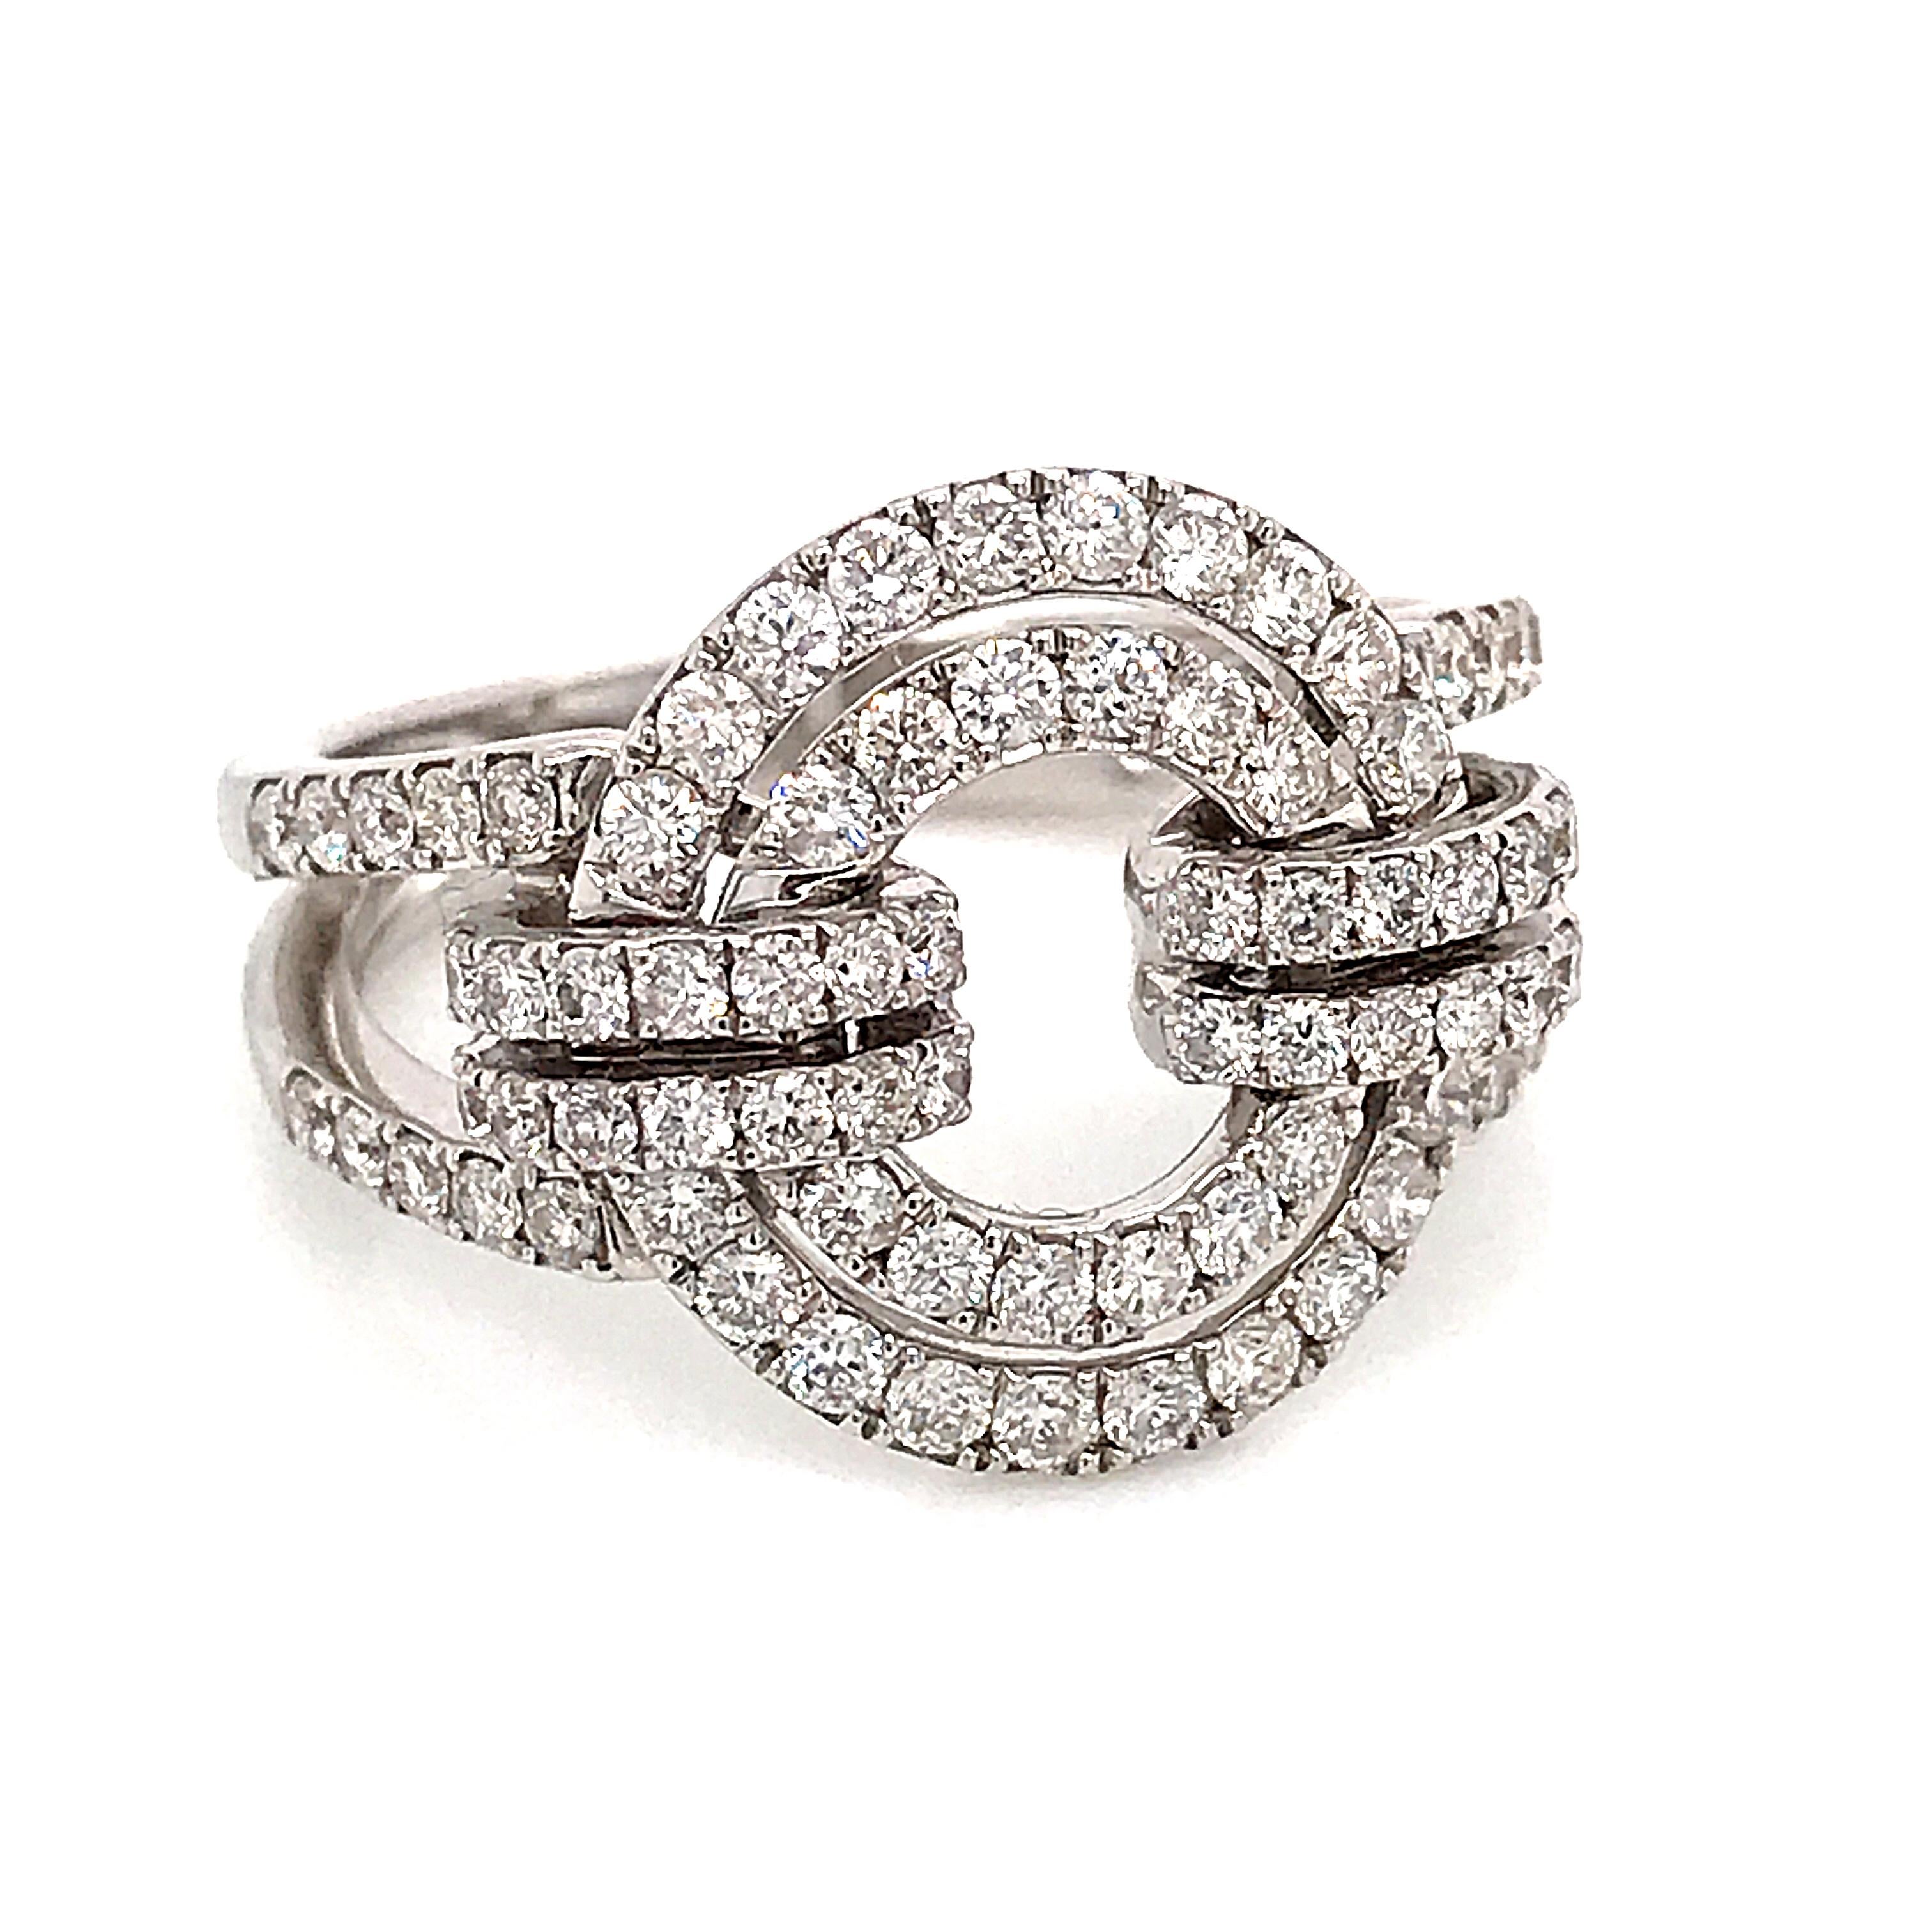 Beautiful White Gold and Diamonds Articulated Circle Ring.
White Gold 18 Carat Weight Gold 6.20 grams 
White Diamonds 0,98 Carat  color H Purity SI Brilliants cut
French Size 55
US Size 7.5
